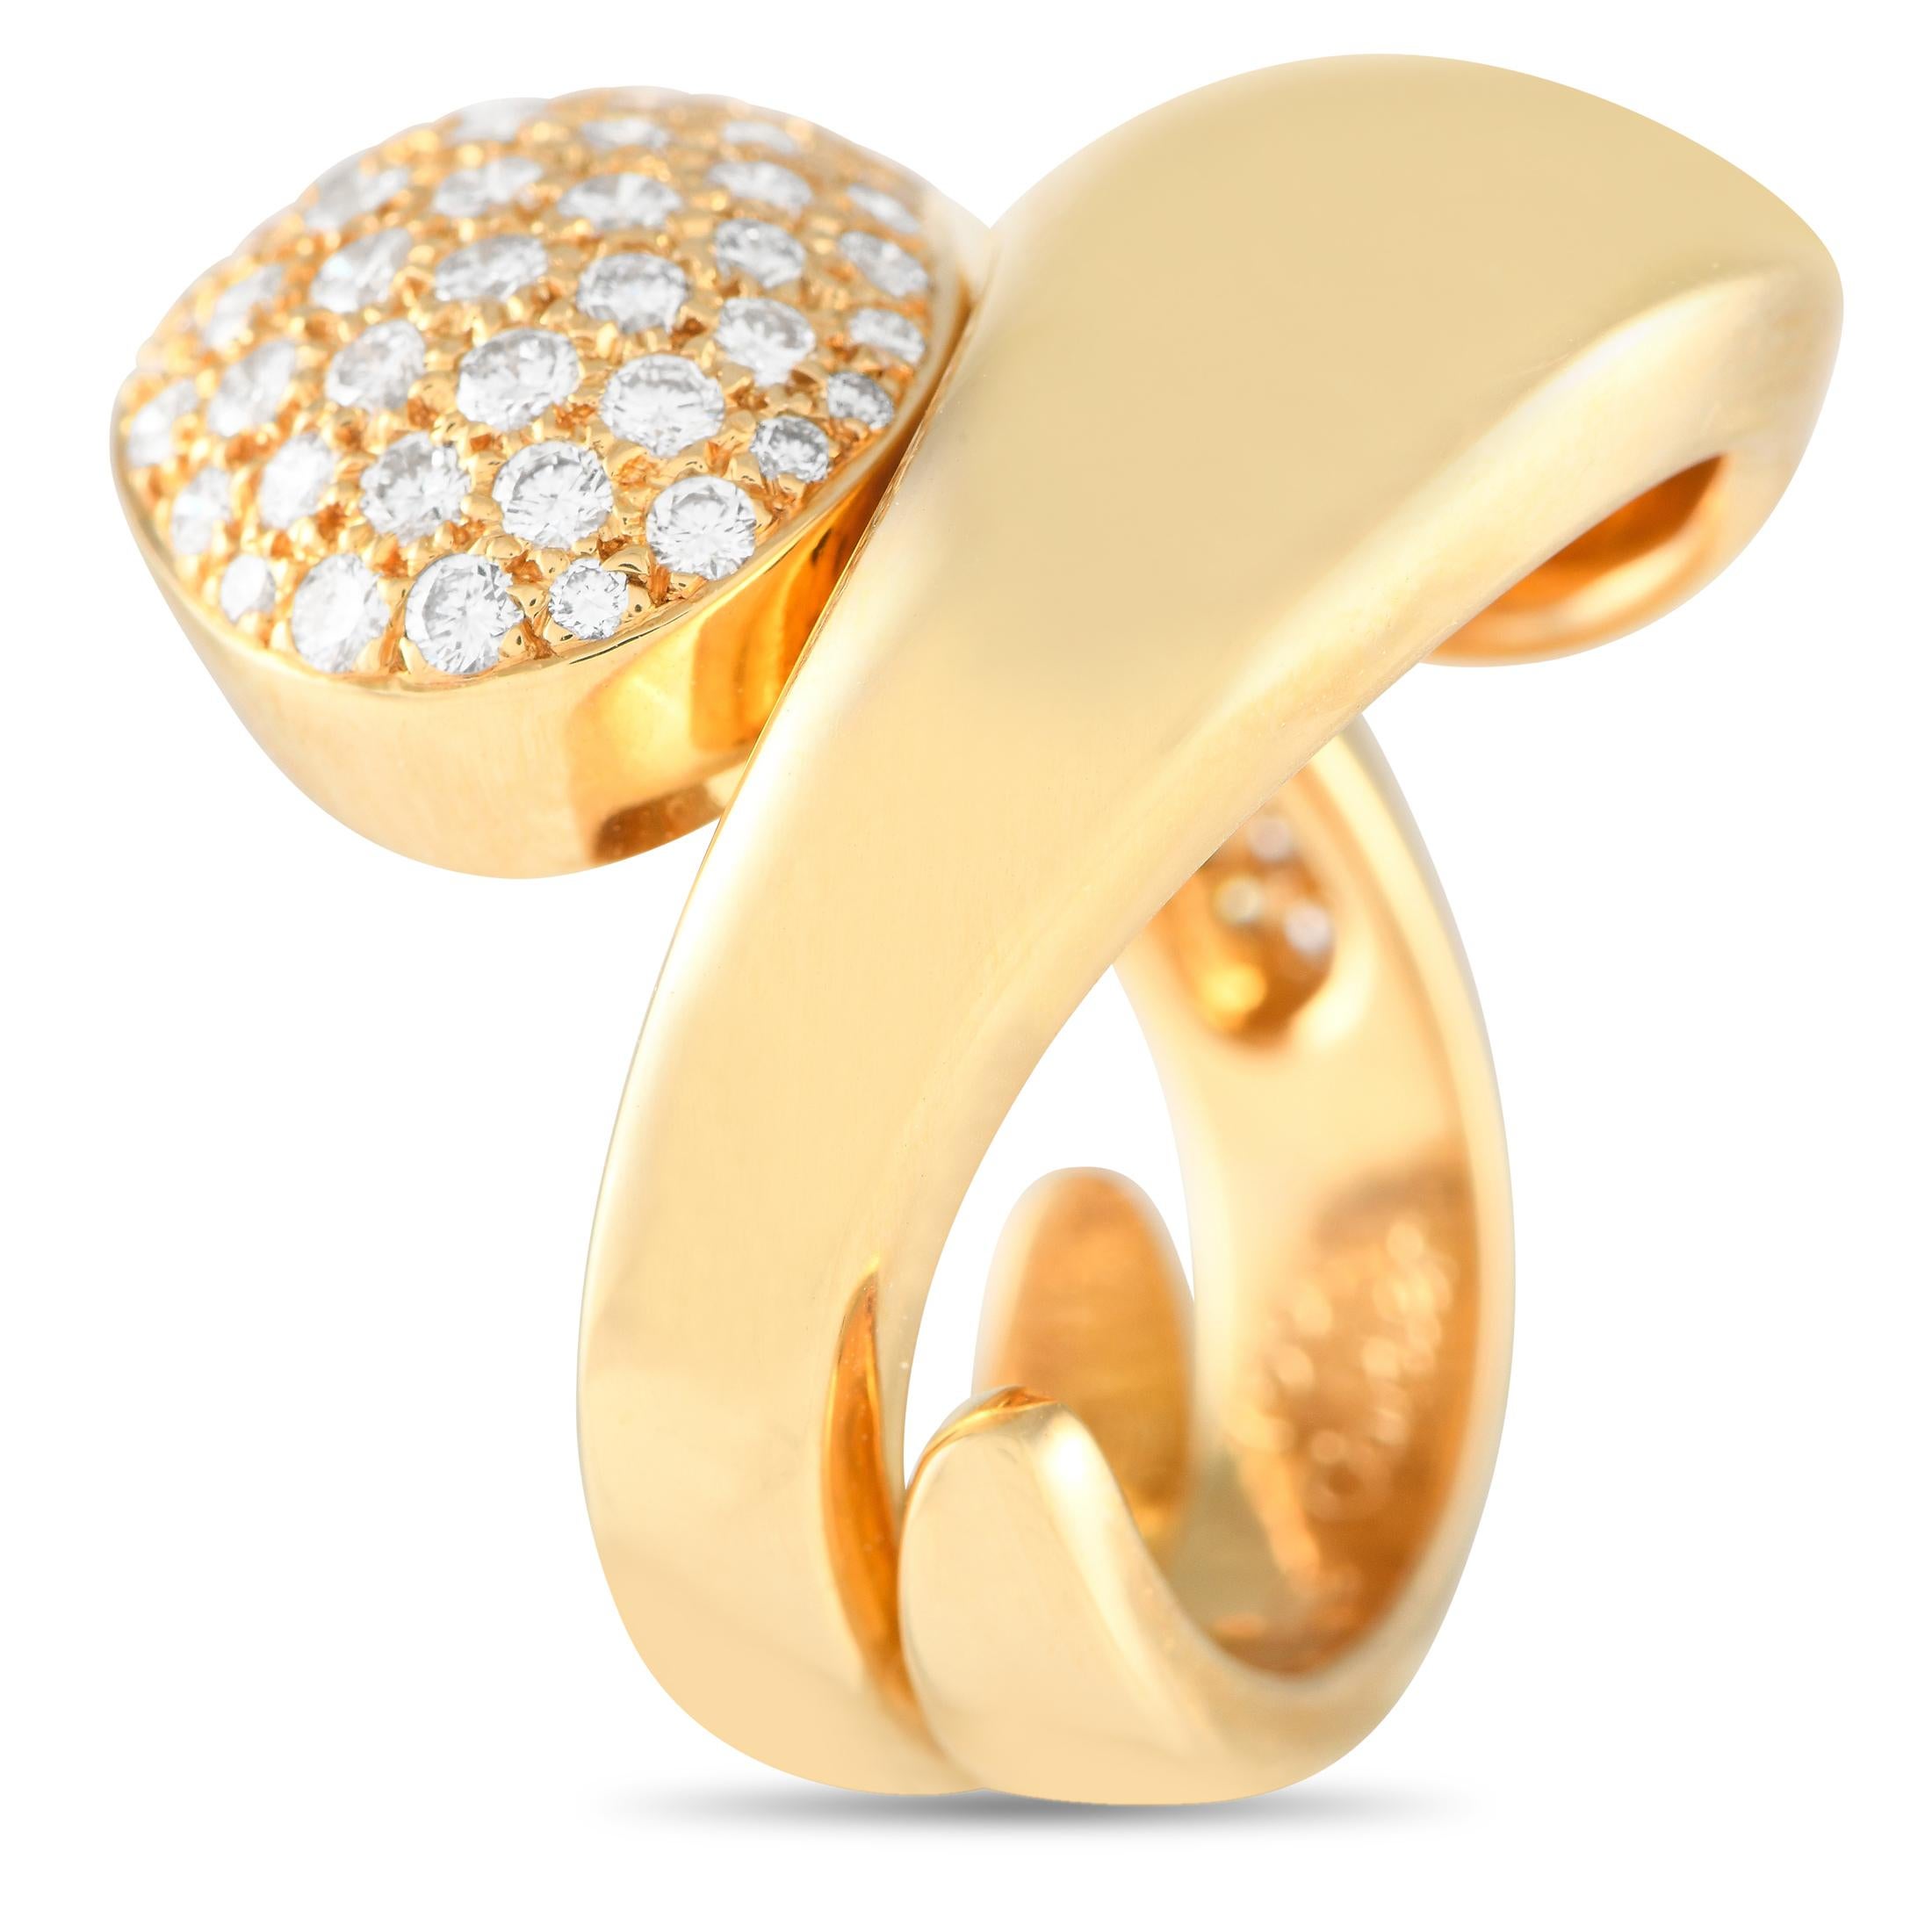 The classic Yin Yang shape is reimagined on this impeccably crafted Cartier Yin Yang ring. The contrast between lustrous 18K Yellow Gold and inset diamonds totaling 1.75 carats adds extra dimension to this simple, elegant accessory. This piece